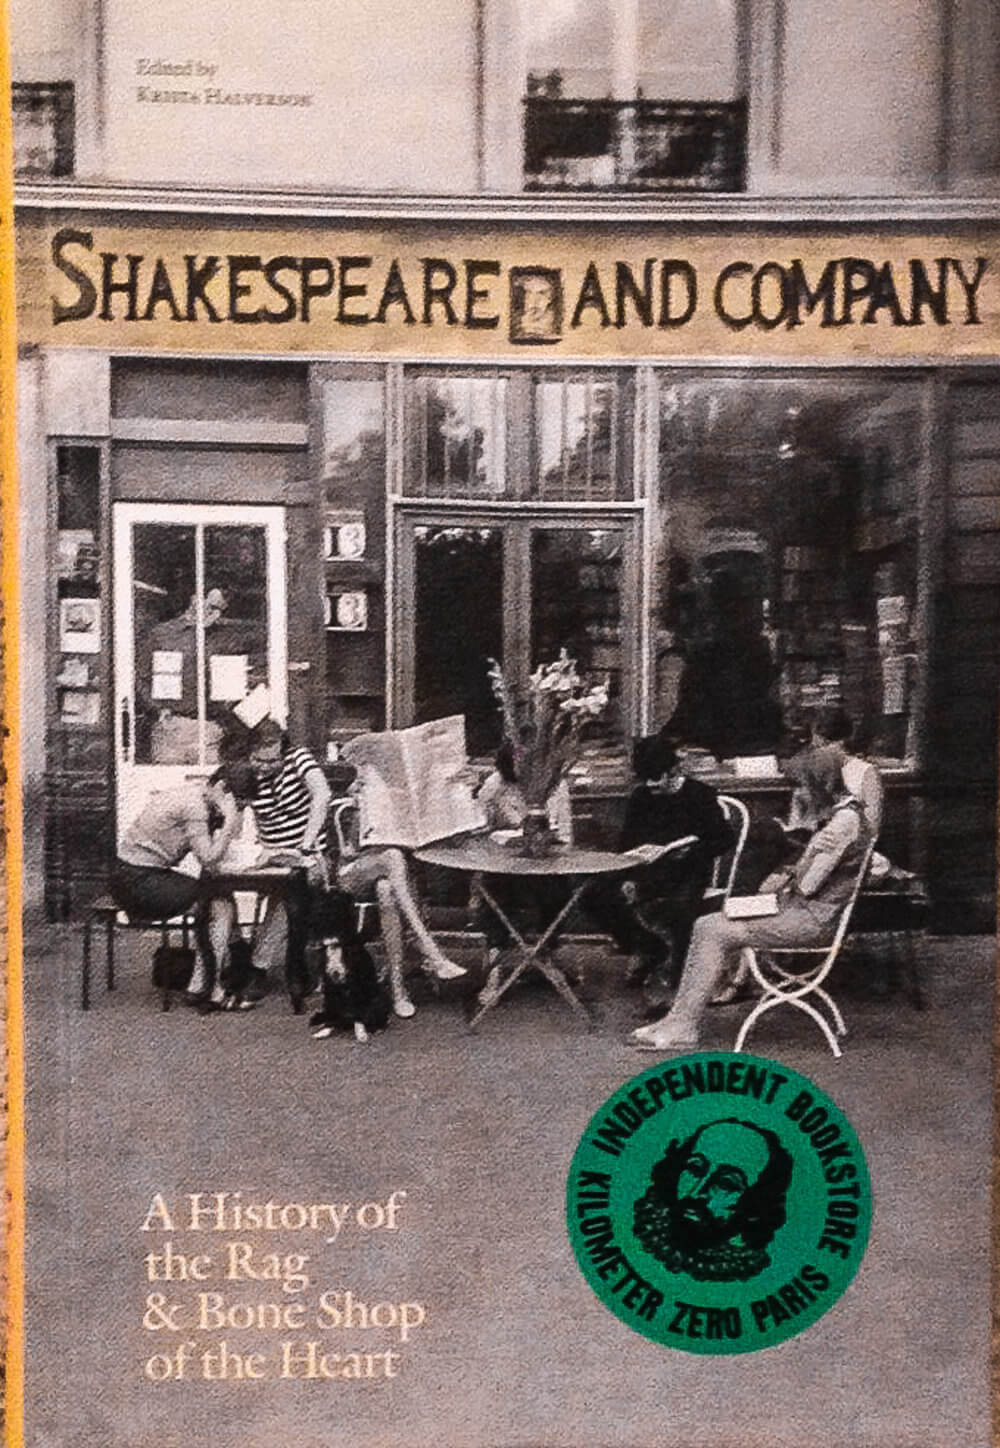 A history of the Rag and Bone shop of the heart = Shakespeare and Company, Paris